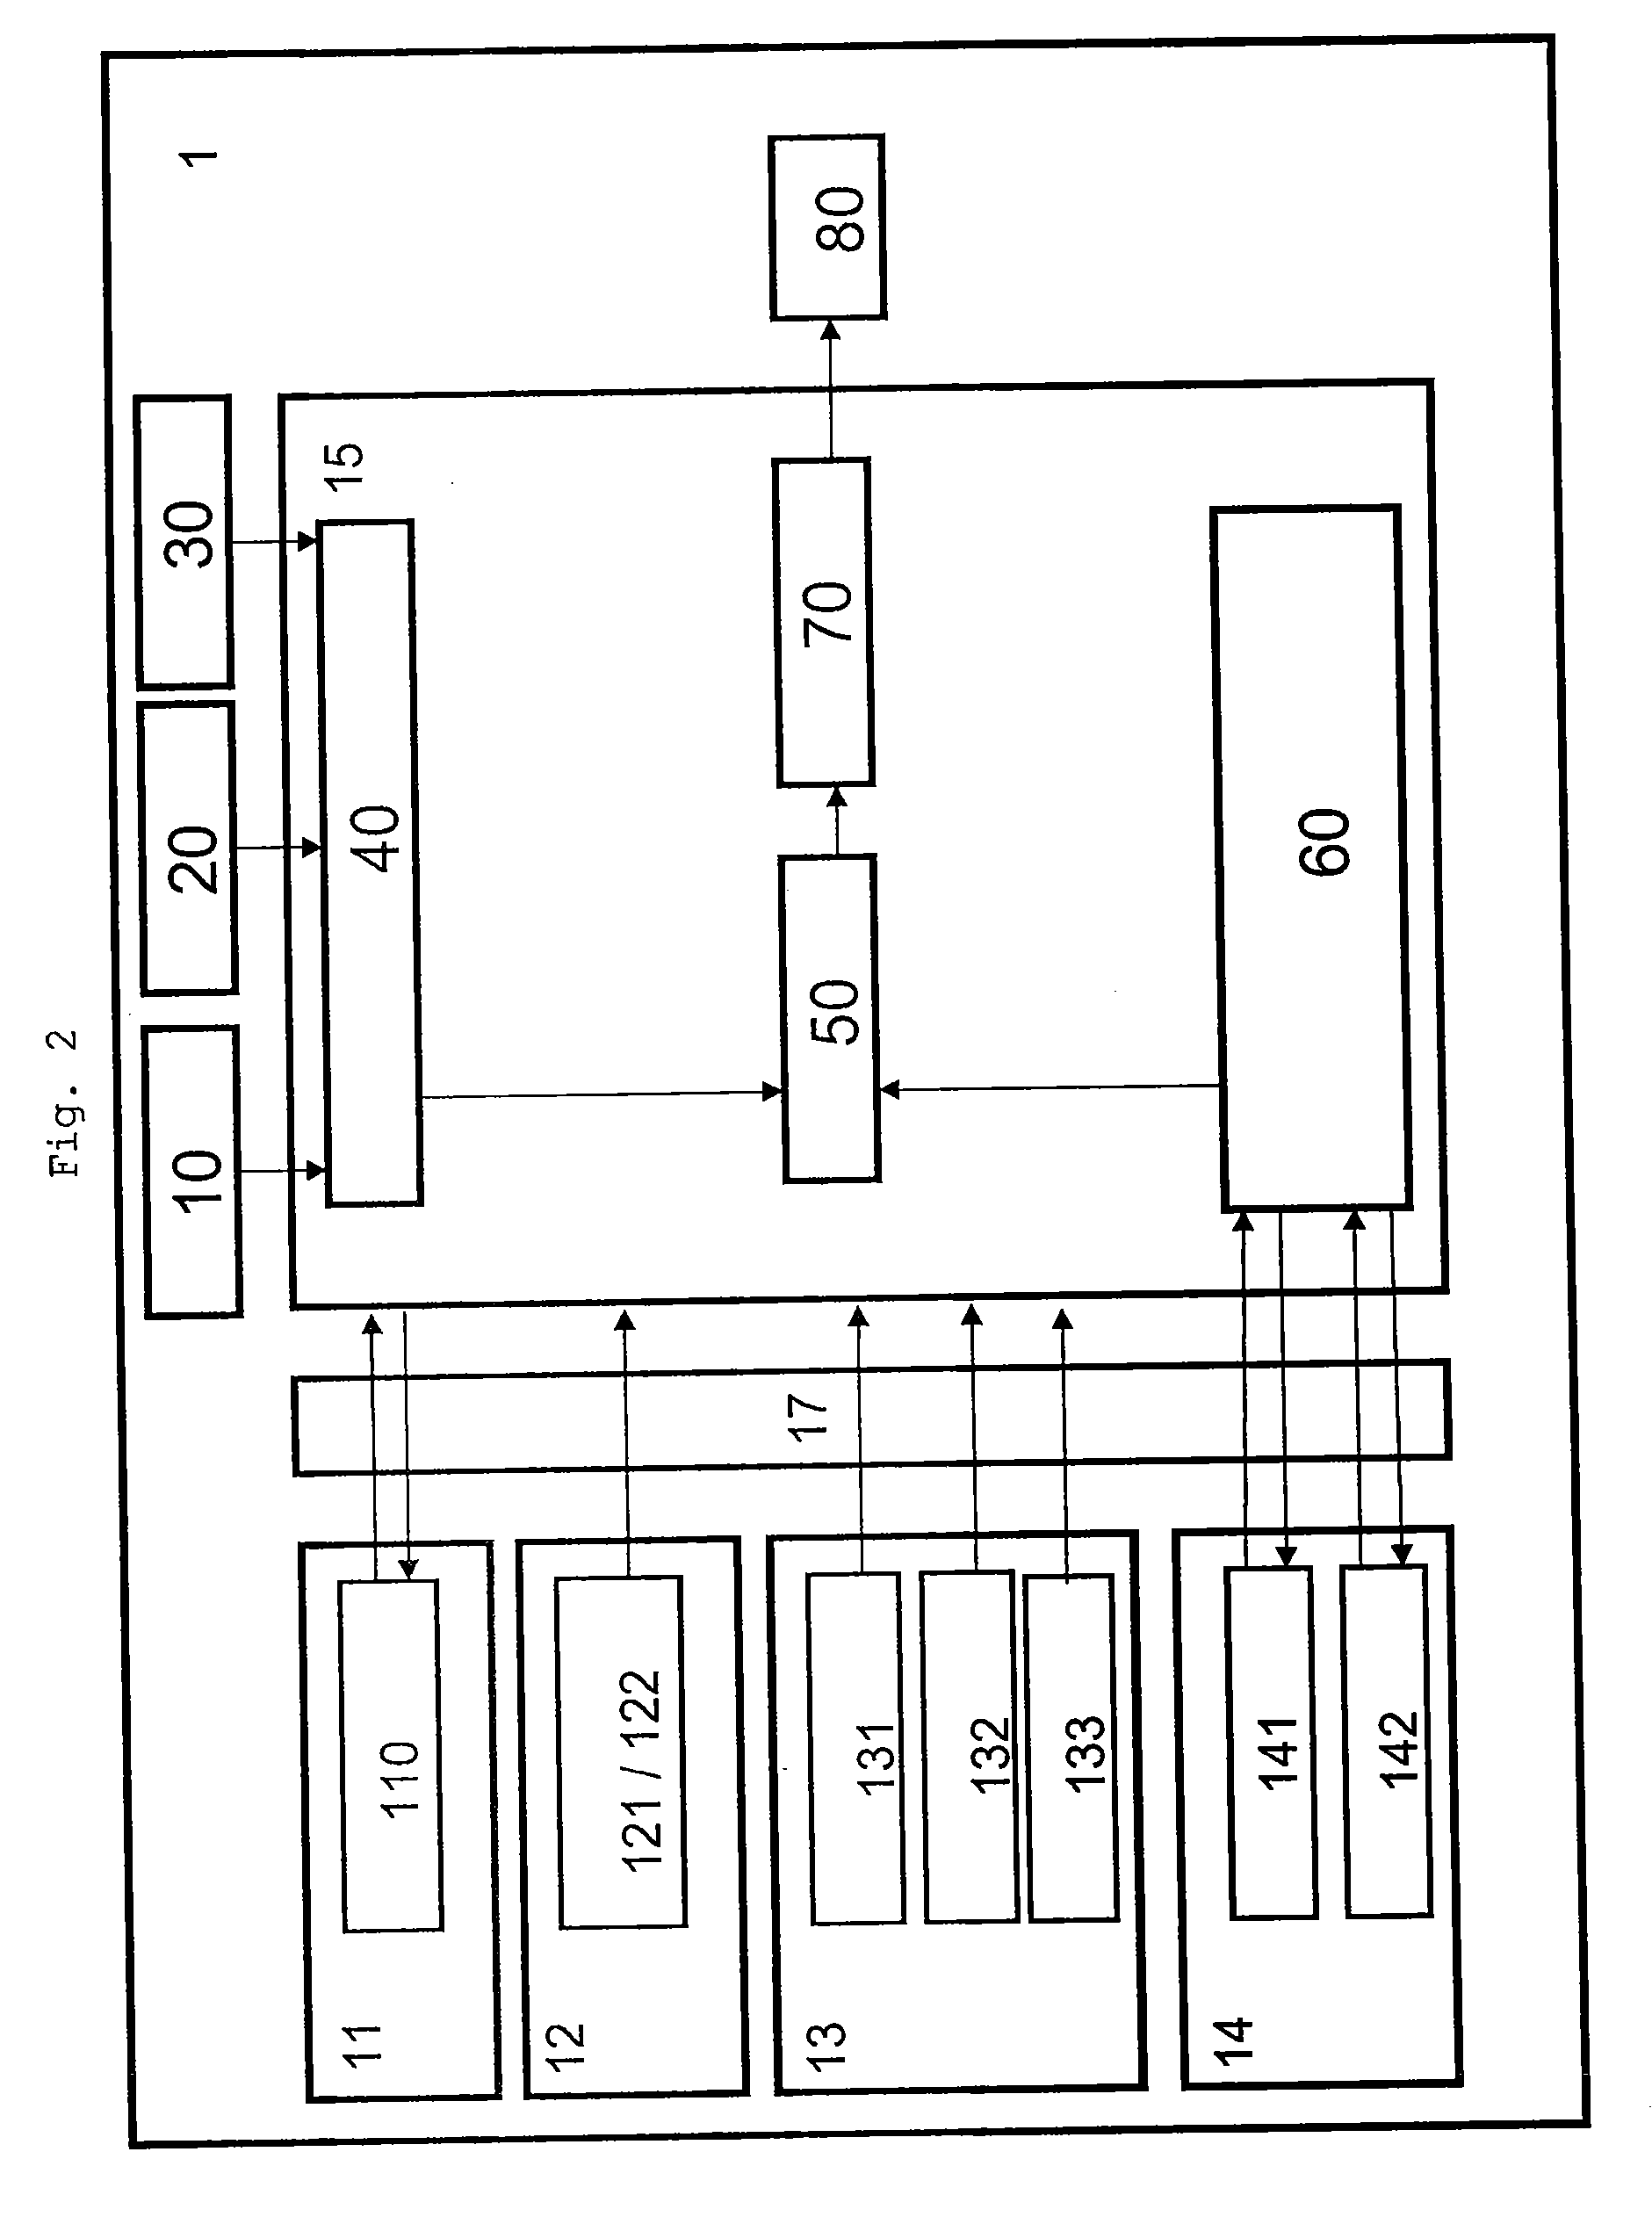 Method and Appratus for Identifying Concealed Objects In Road Traffic